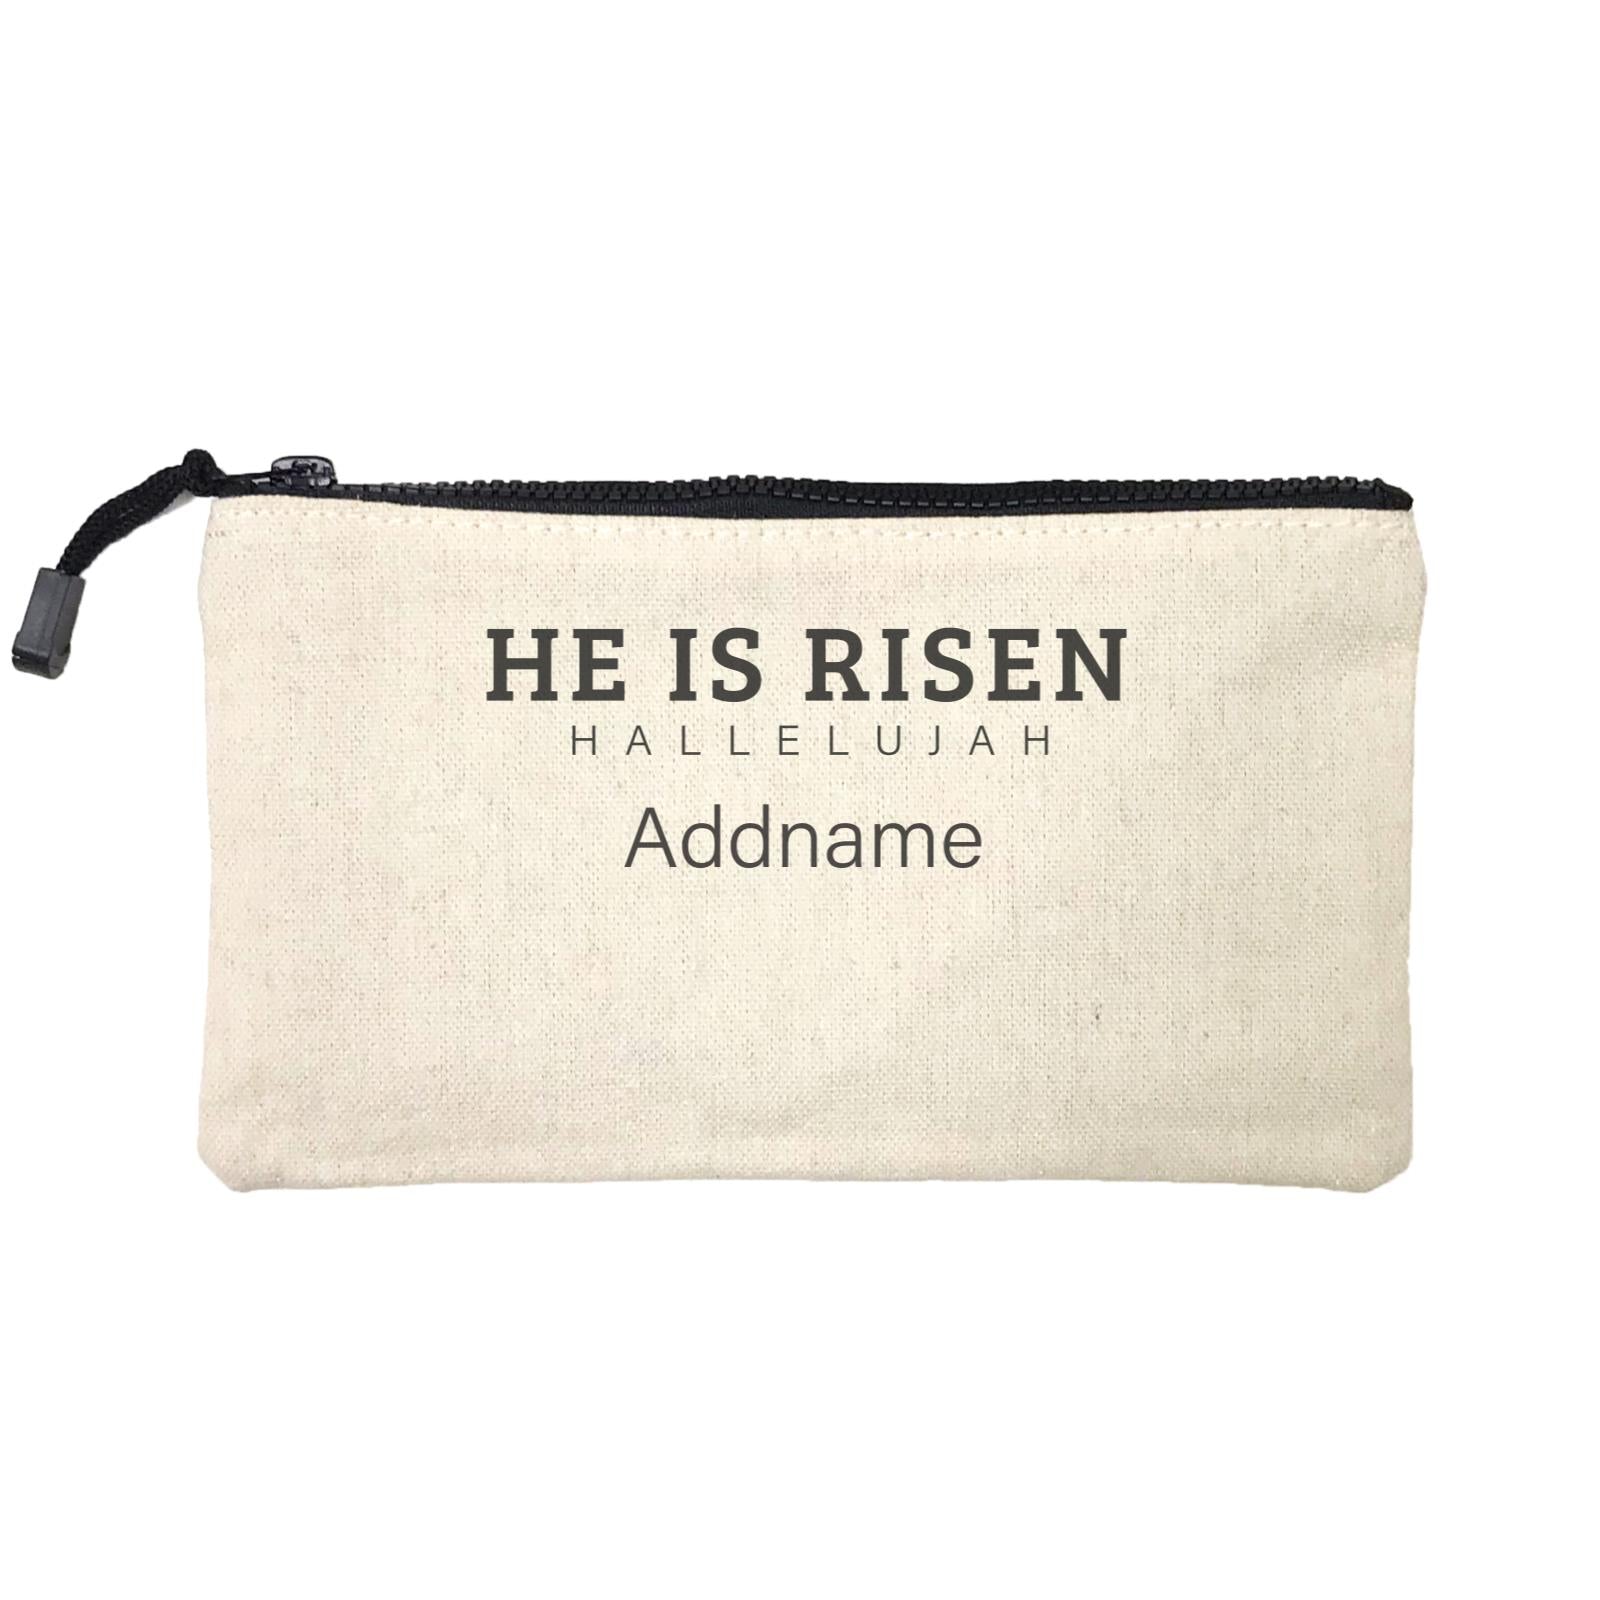 Christian Series He is Risen Hallelujah Addname Mini Accessories Stationery Pouch